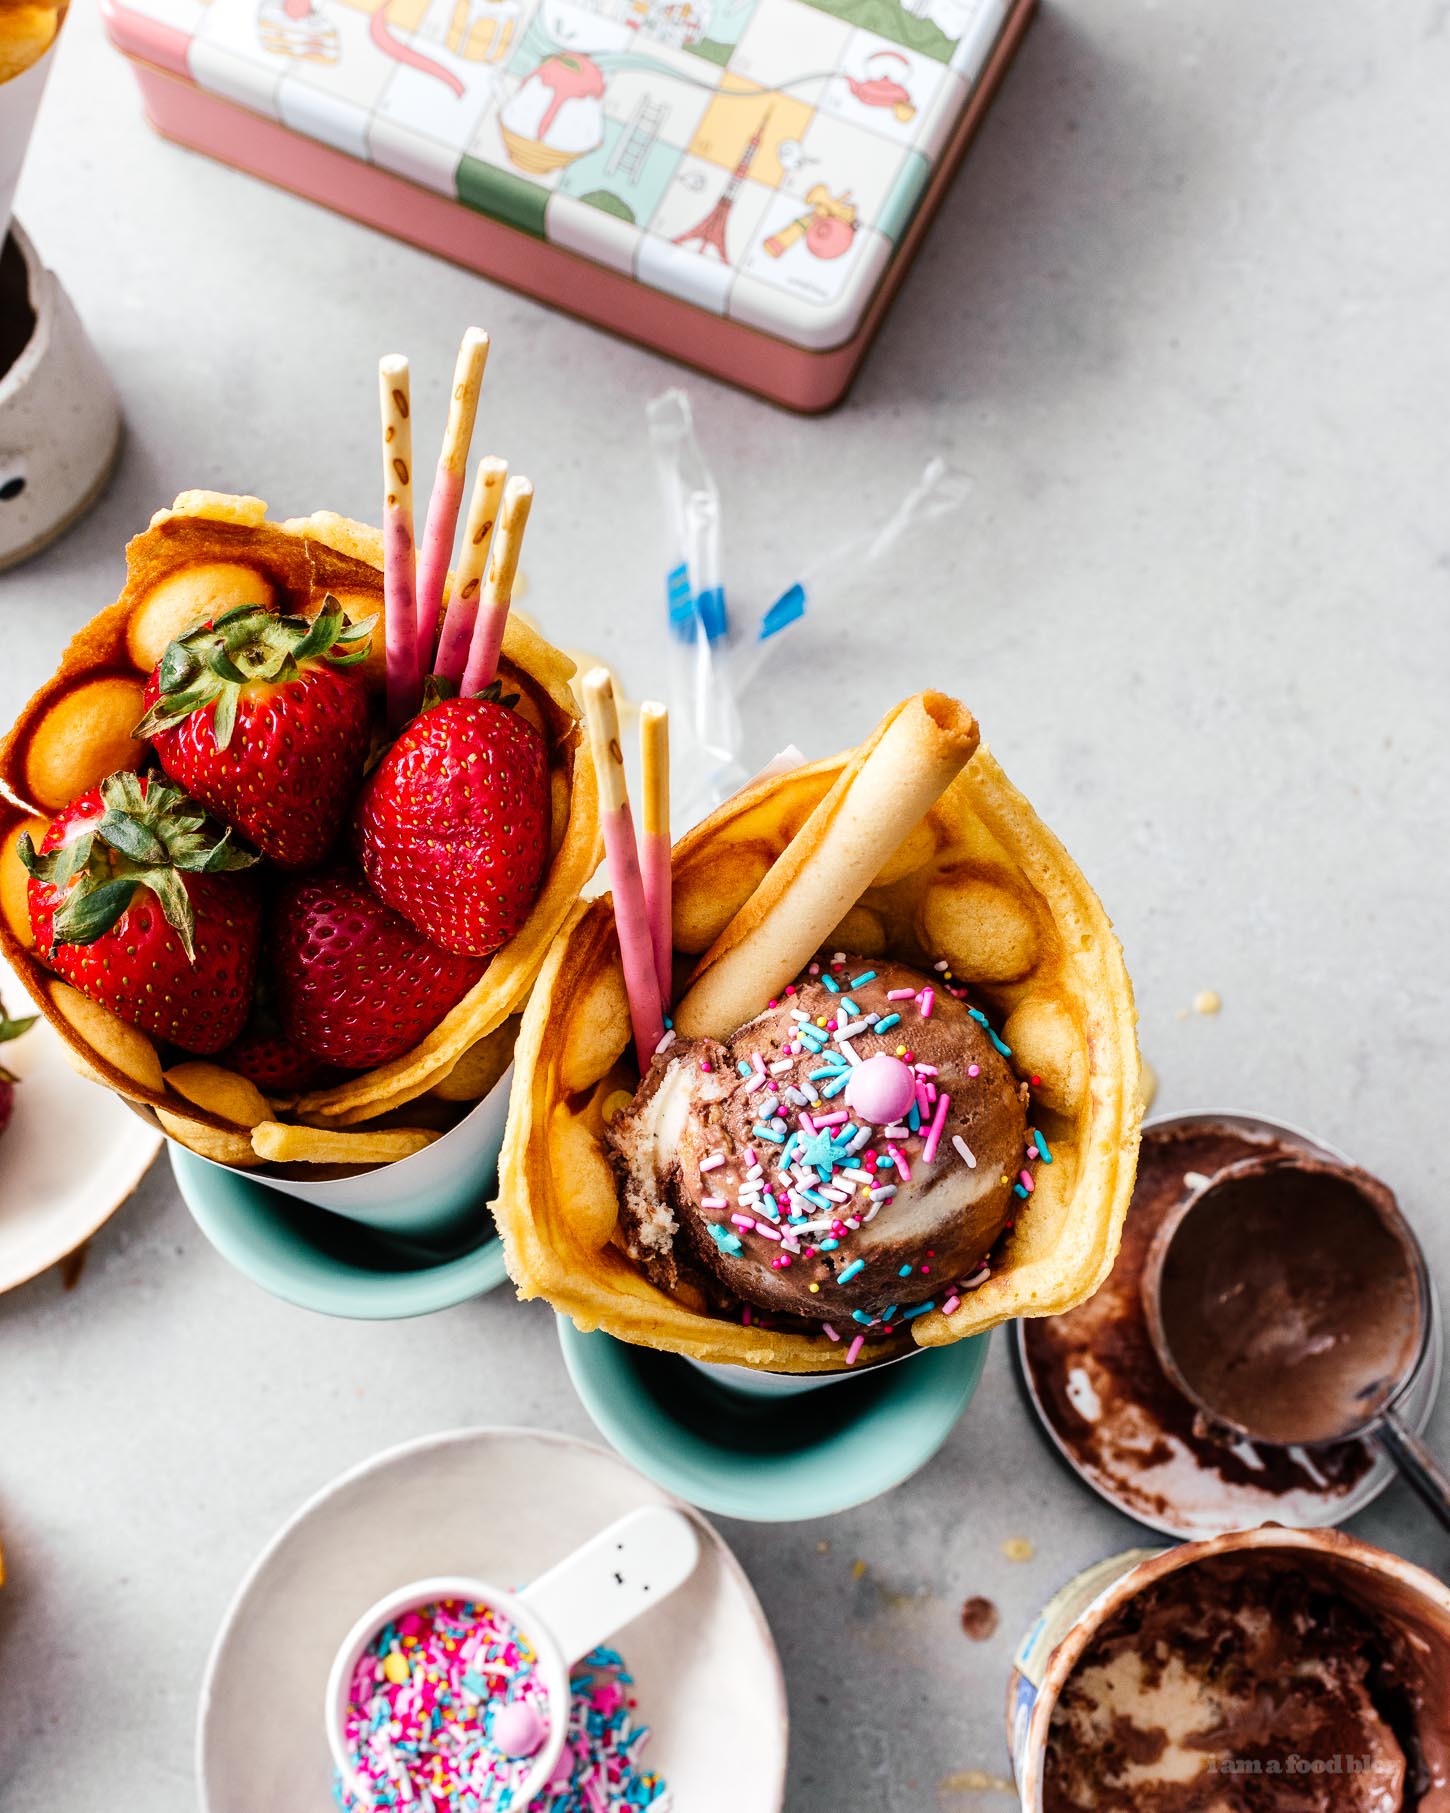 Make your own infinitely instagram friendly bubble waffle ice cream cones/puffle cones/eggloo egg waffle cones right at home. The batter comes together easily and you can fill your cones with ALL the things: ice cream, fruit, cookies, anything goes. #bubblewaffle #bubblewafflecones #hongkongbubblewaffles #pufflecone #eggloo #eggwaffle #recipes #dessertrecipes